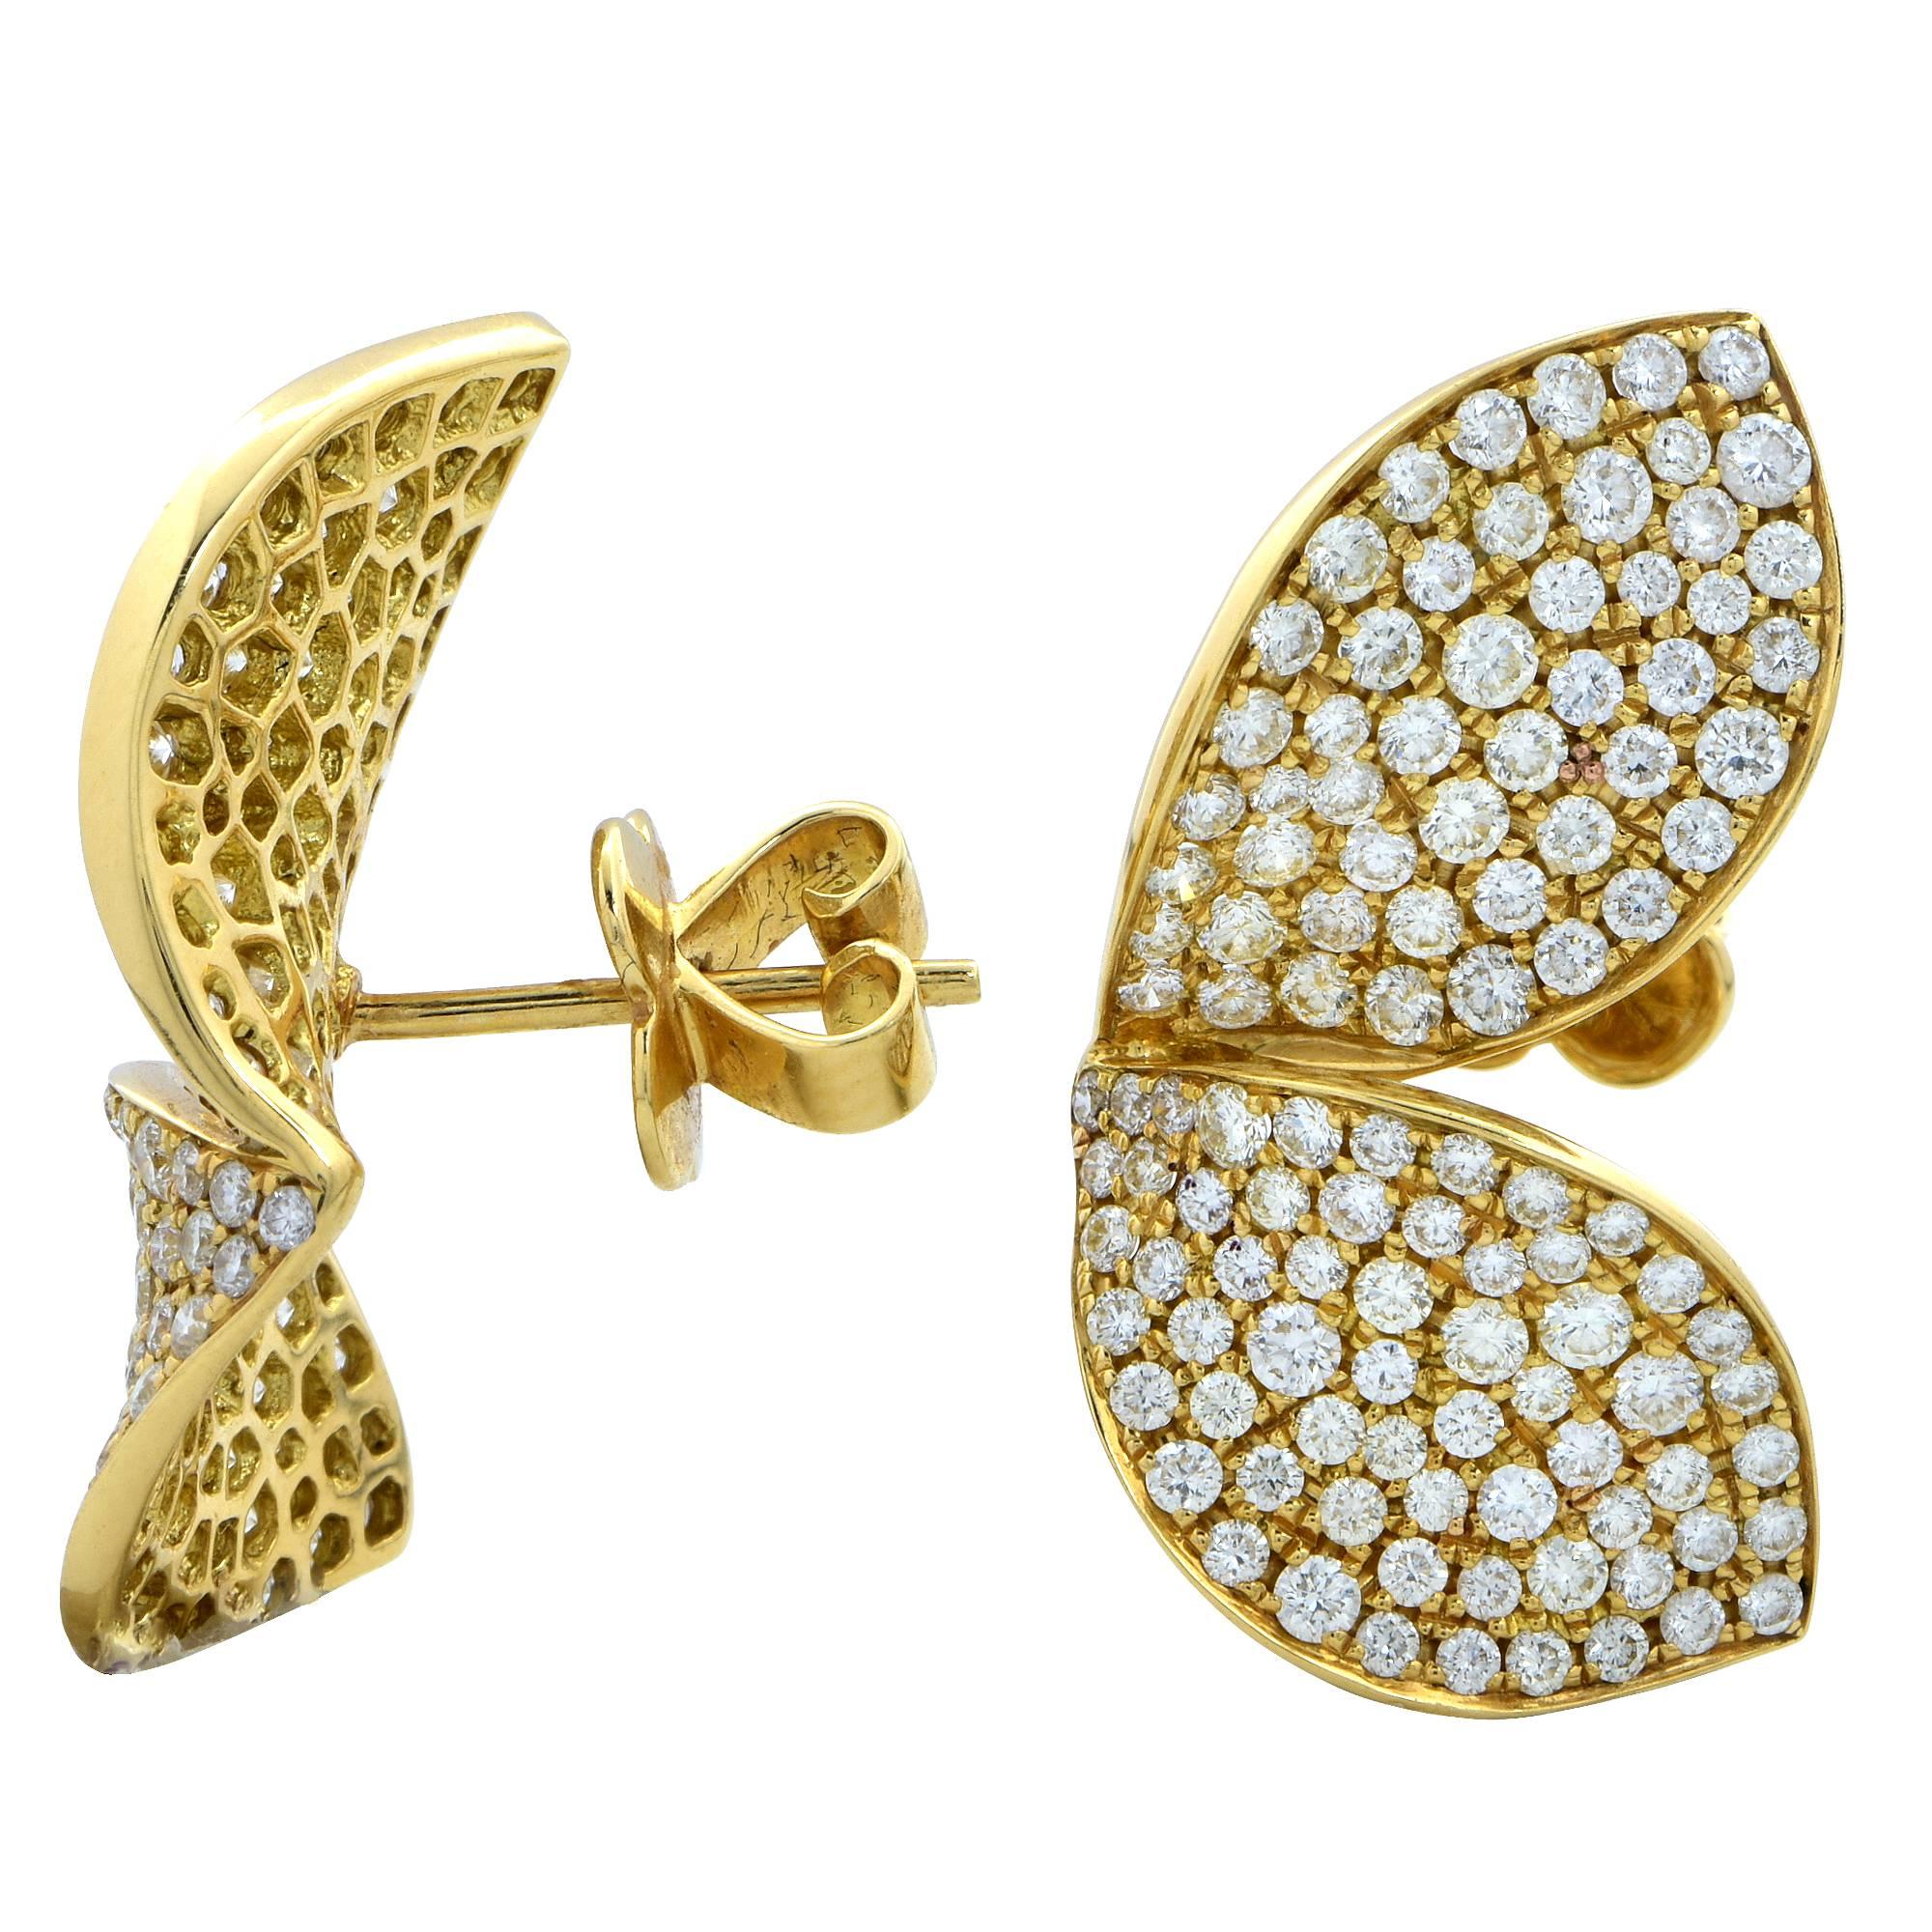 18k yellow gold earrings accented by 200 round brilliant cut diamonds set in a double leaf motif weighing approximately 2.50ct G color and VS clarity. These whimsical earrings are gorgeous and measure 1 inch in height by .50 inch in width.

It is